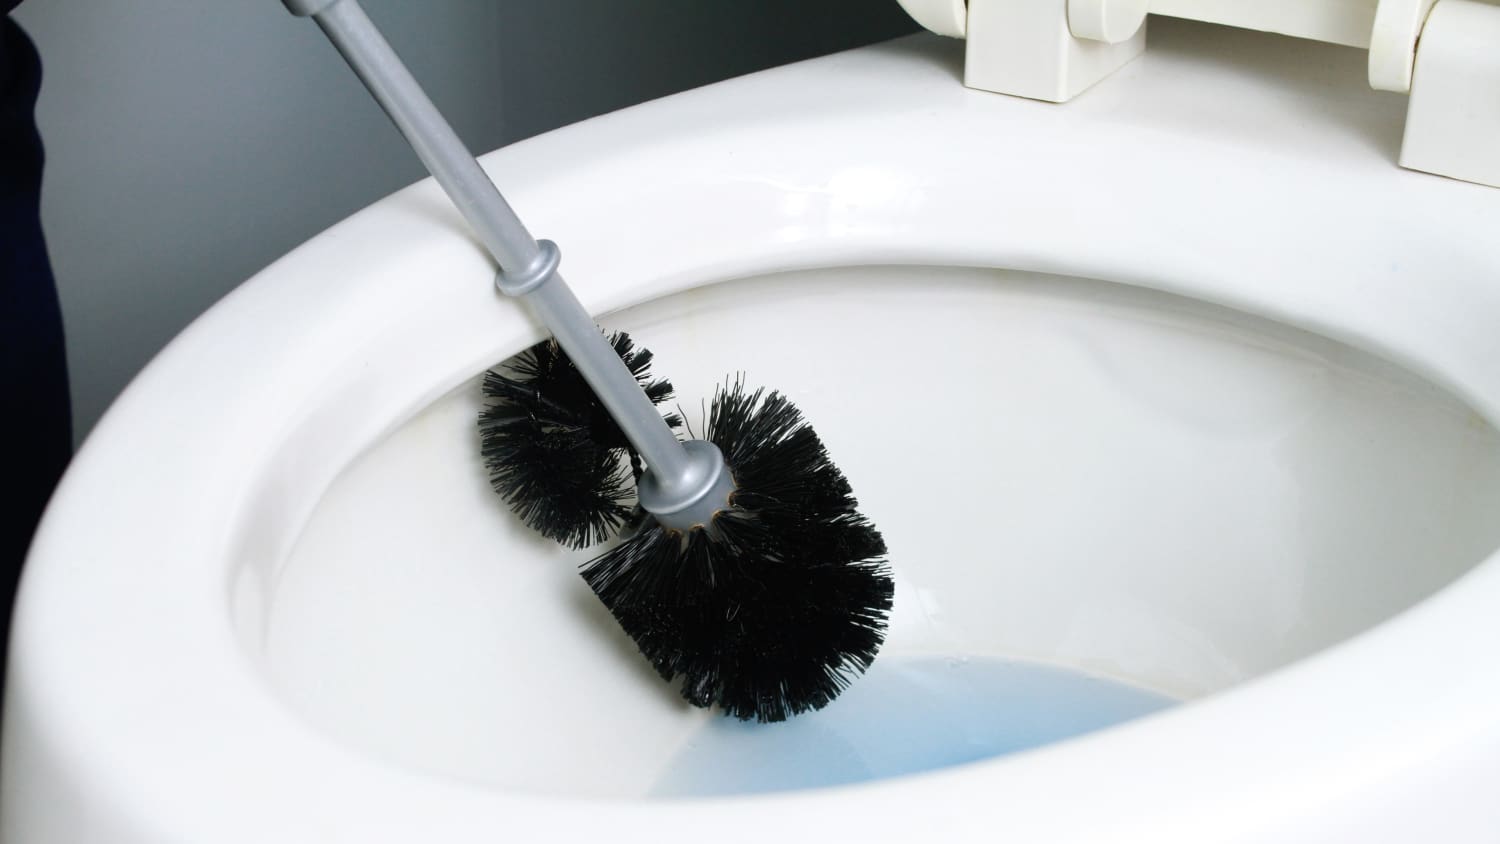 Ways To Keep Your Toilet Brush Holder Clean and Sanitized